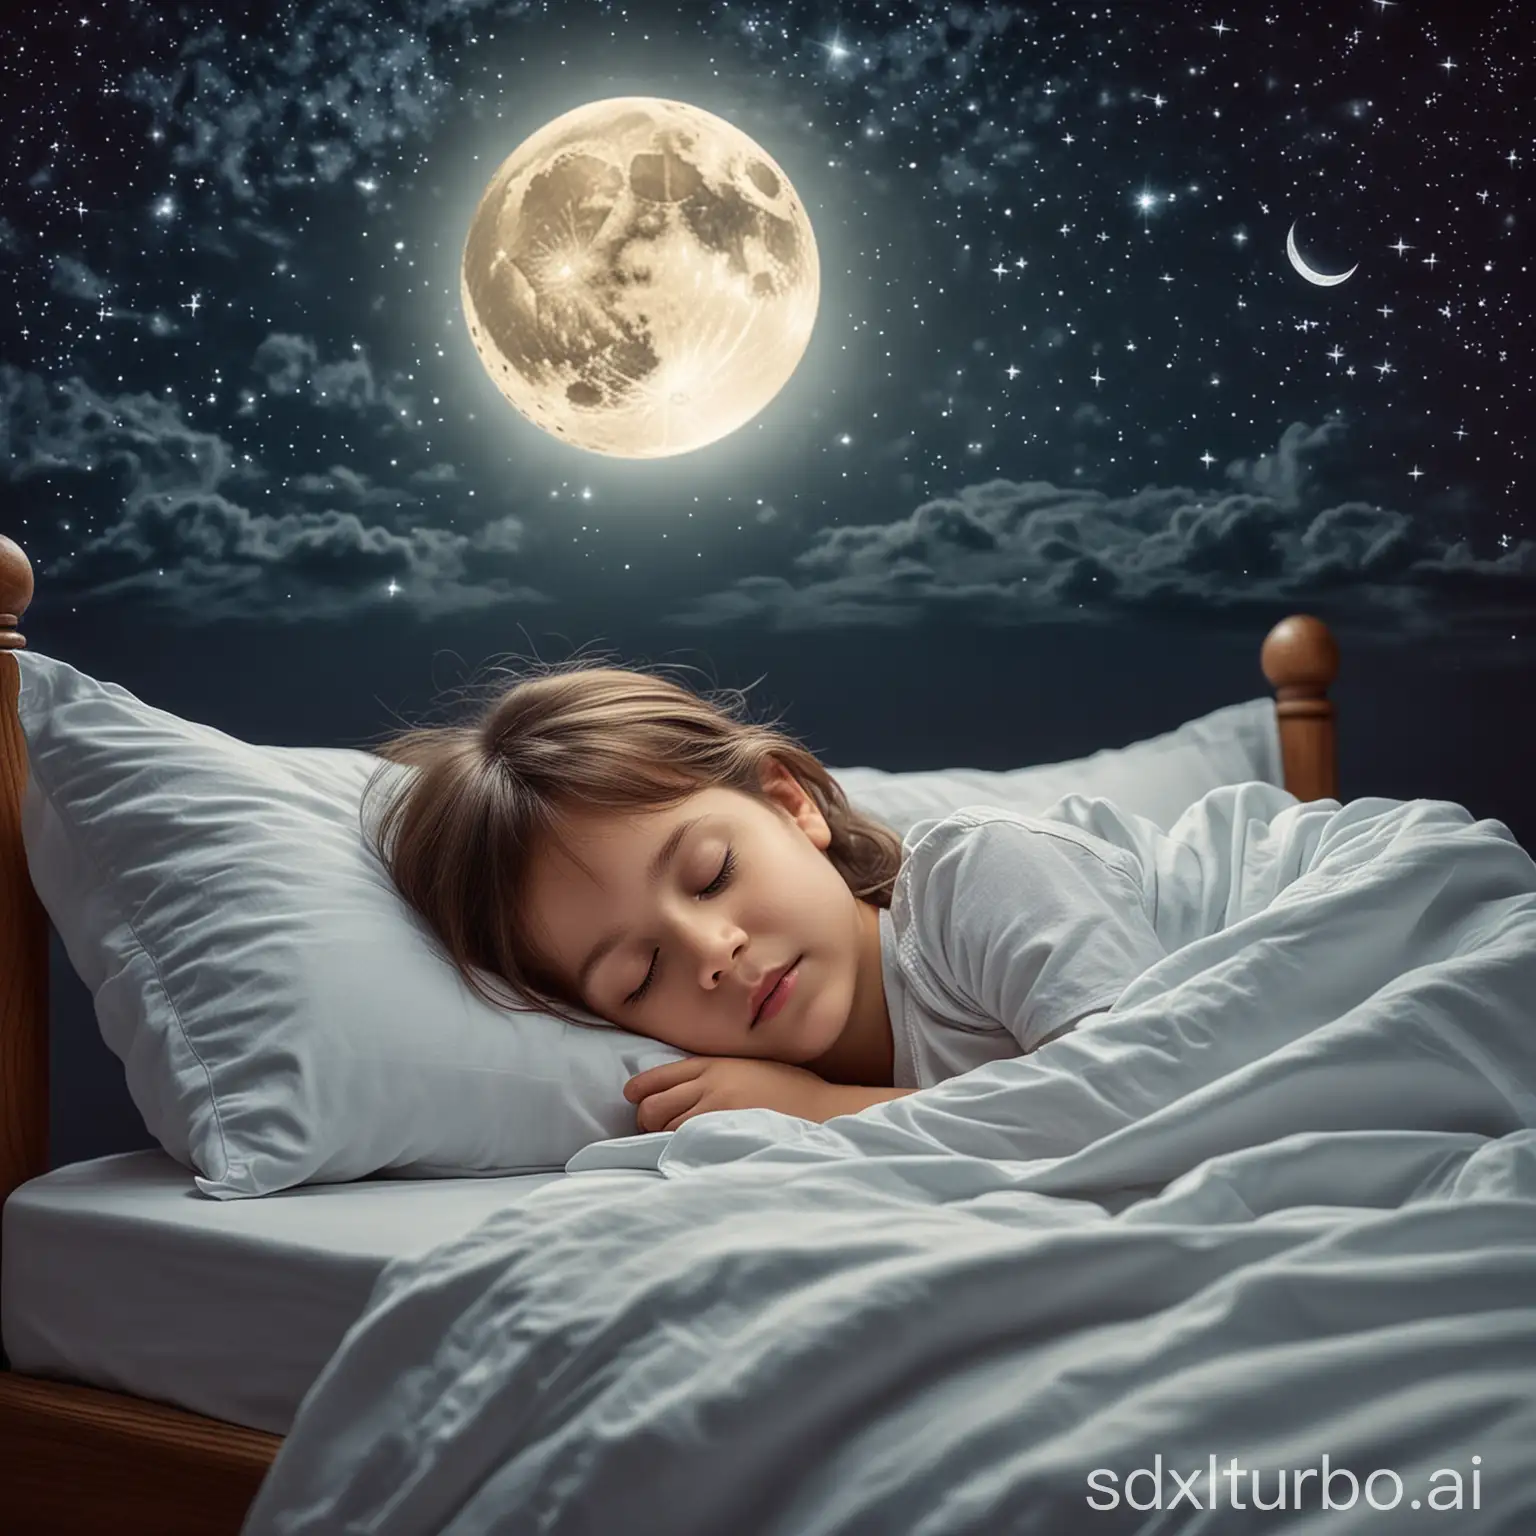 Child-Dreaming-of-Holiday-Adventures-with-Moonlit-Night